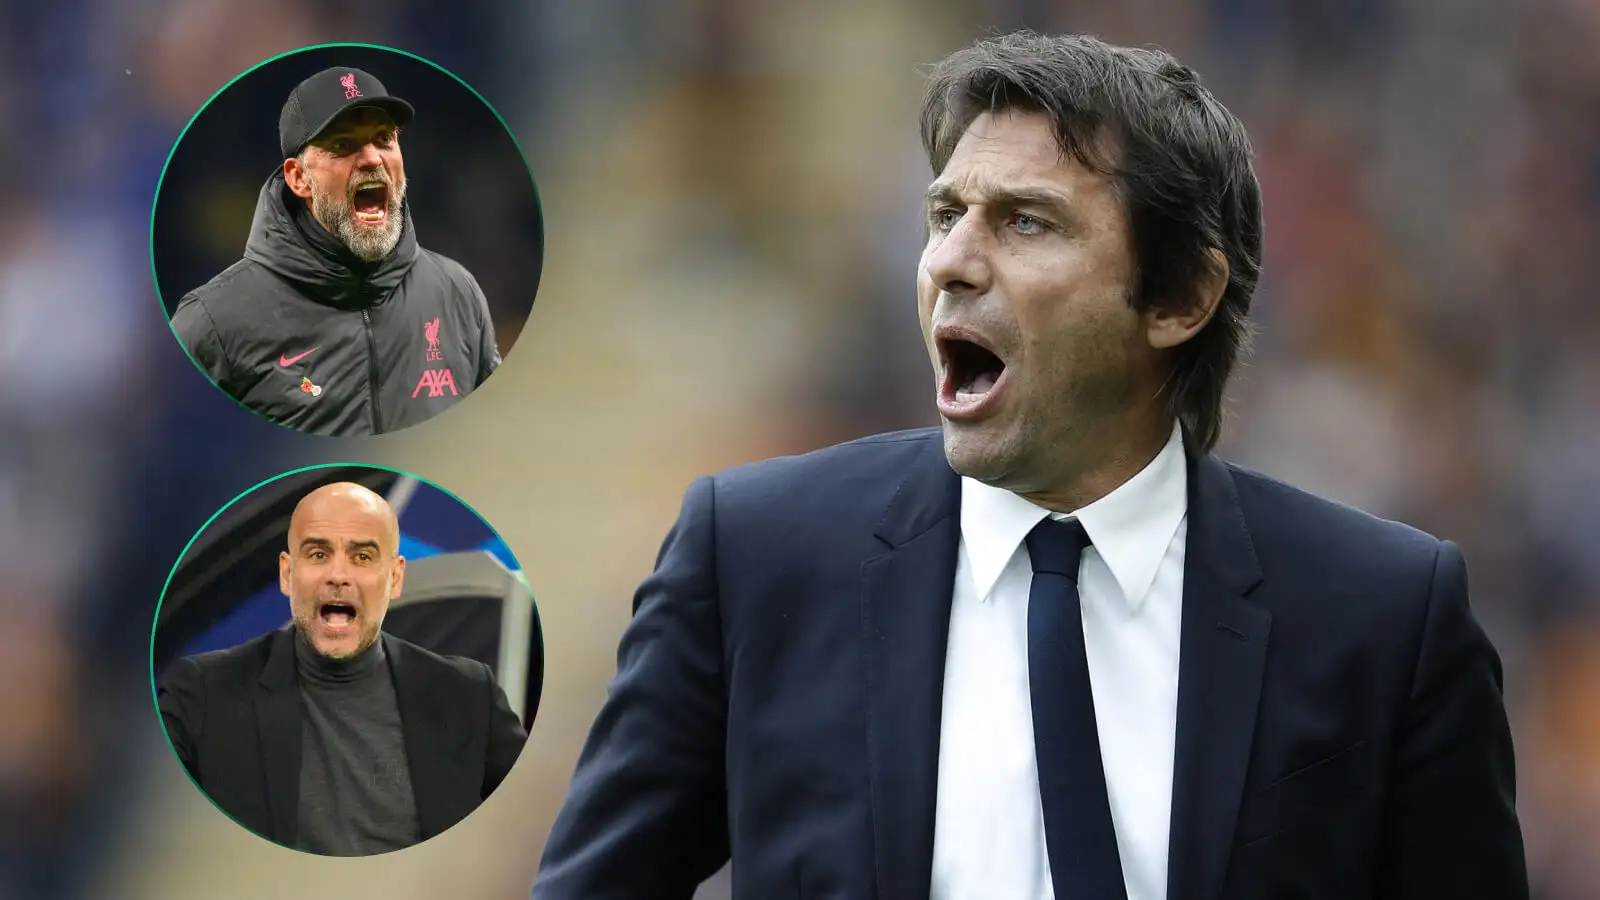 Conte reveals stunning Chelsea transfer miss that would’ve prevented Liverpool title win and halted Man City domination